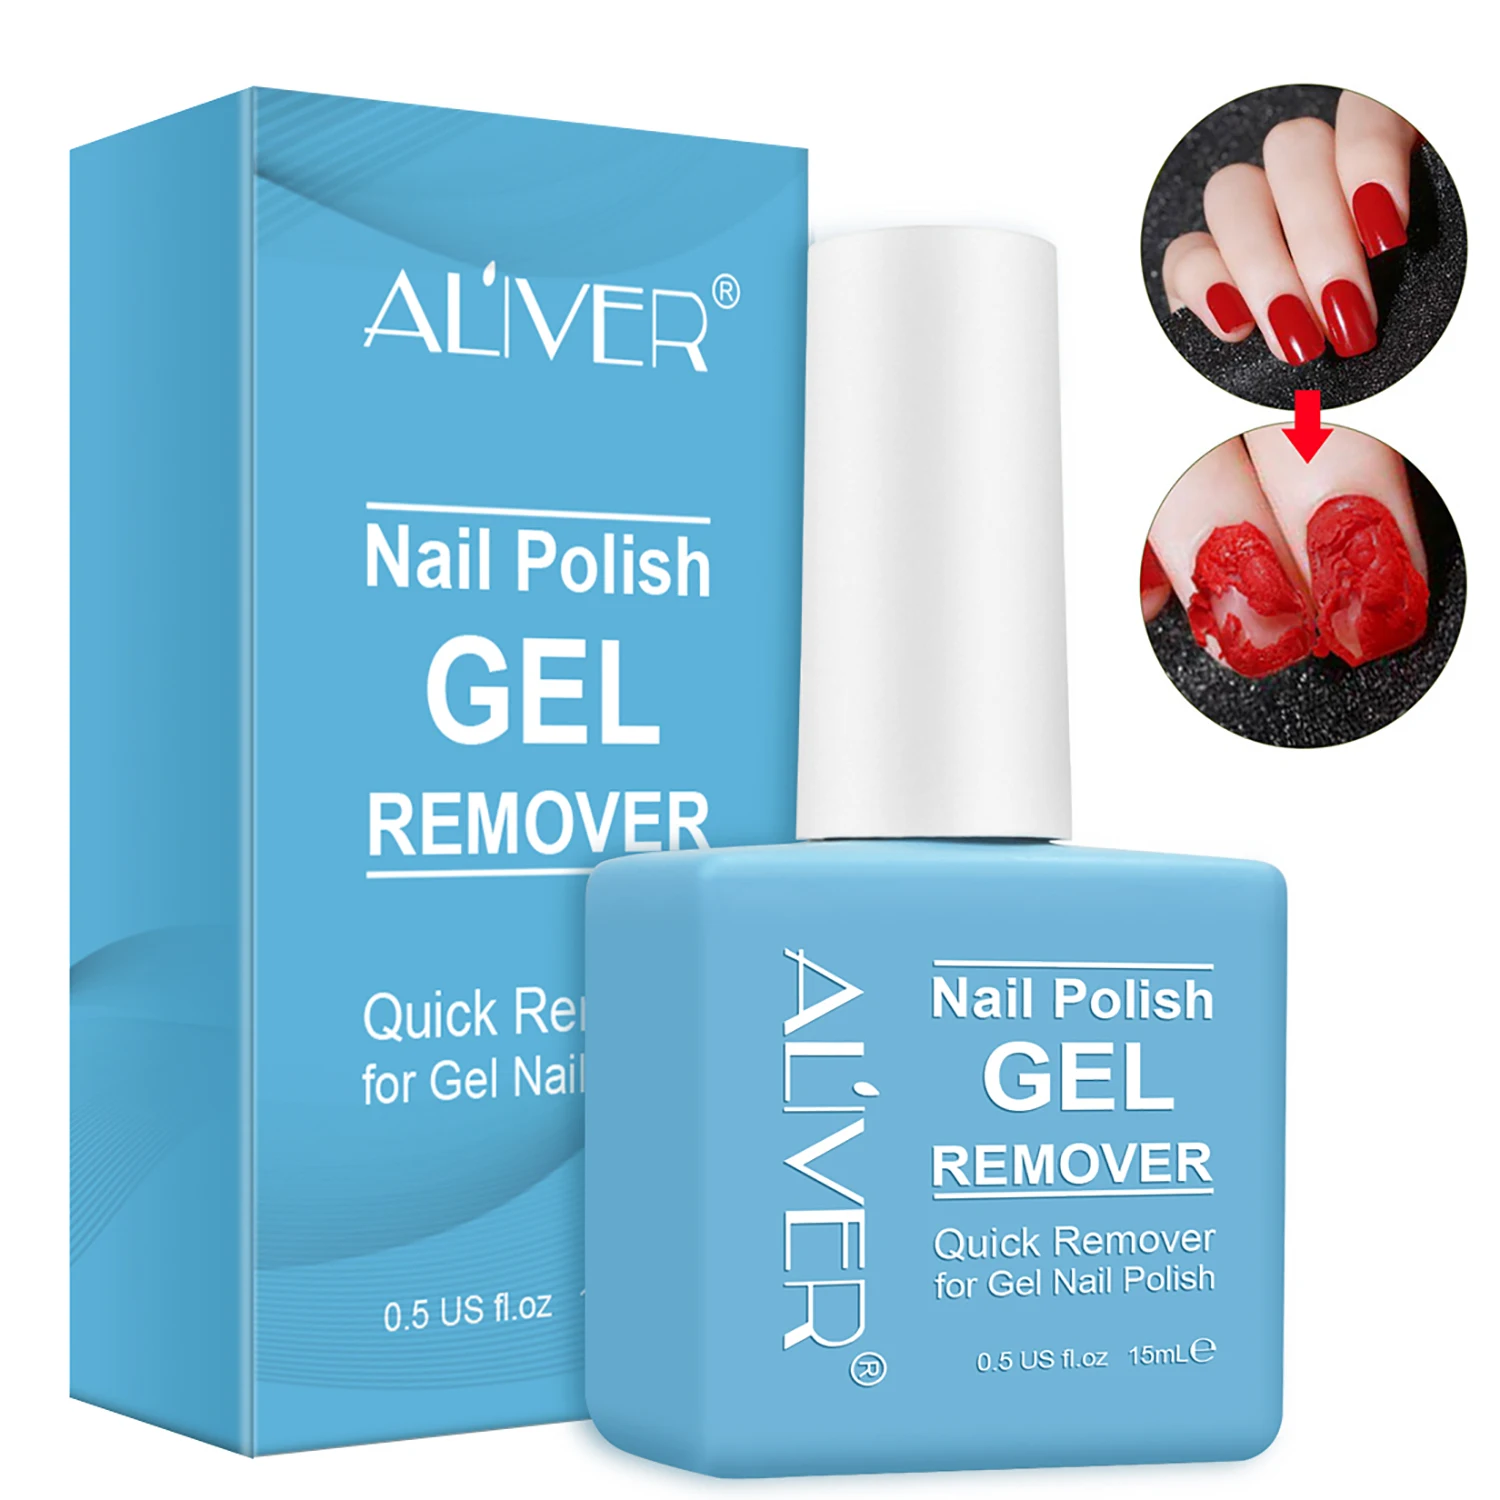 

Aliver Blue nail polish remover that quickly and easily removes nail gel in 3-5 minutes